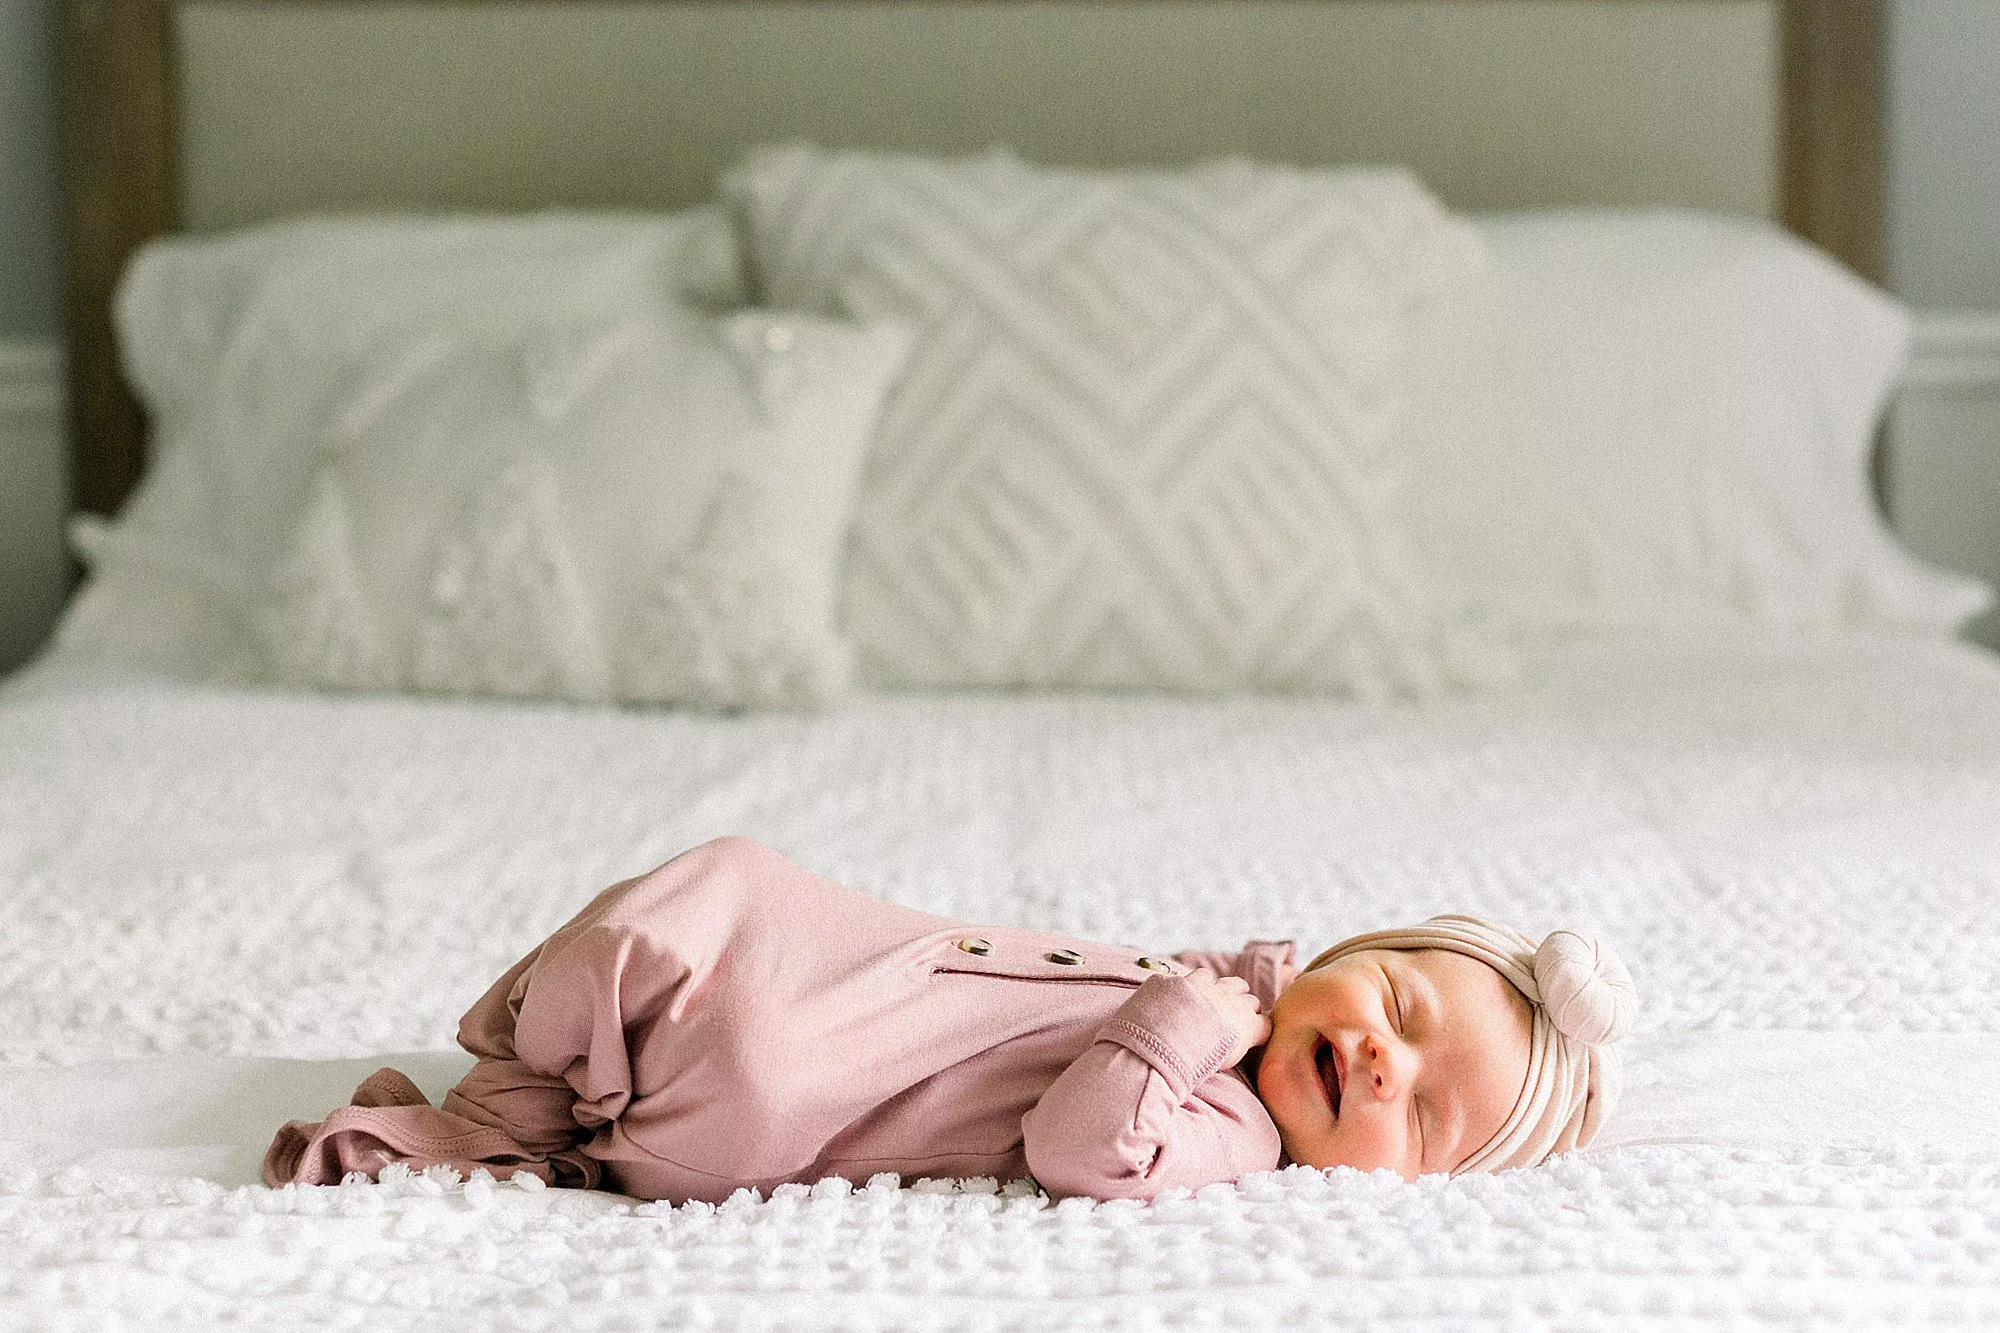 Smiling baby sleeping on bed in pink gown